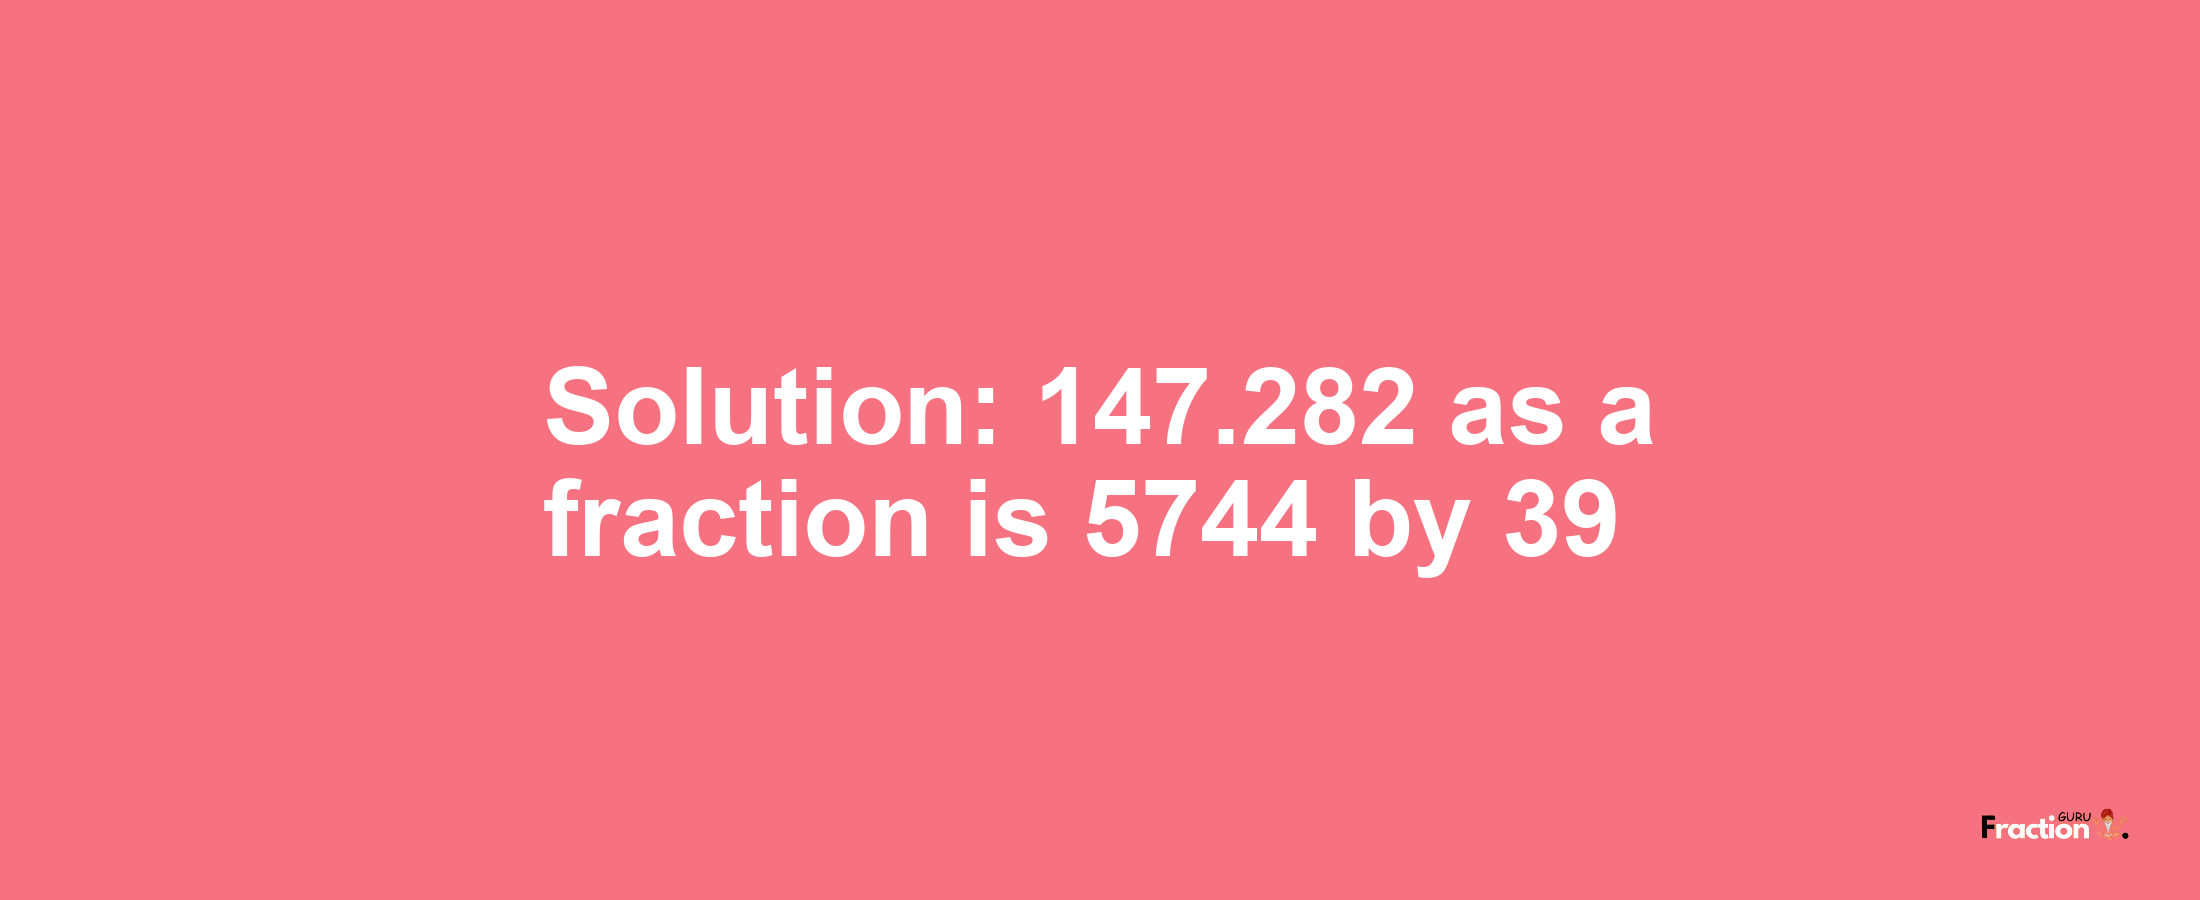 Solution:147.282 as a fraction is 5744/39